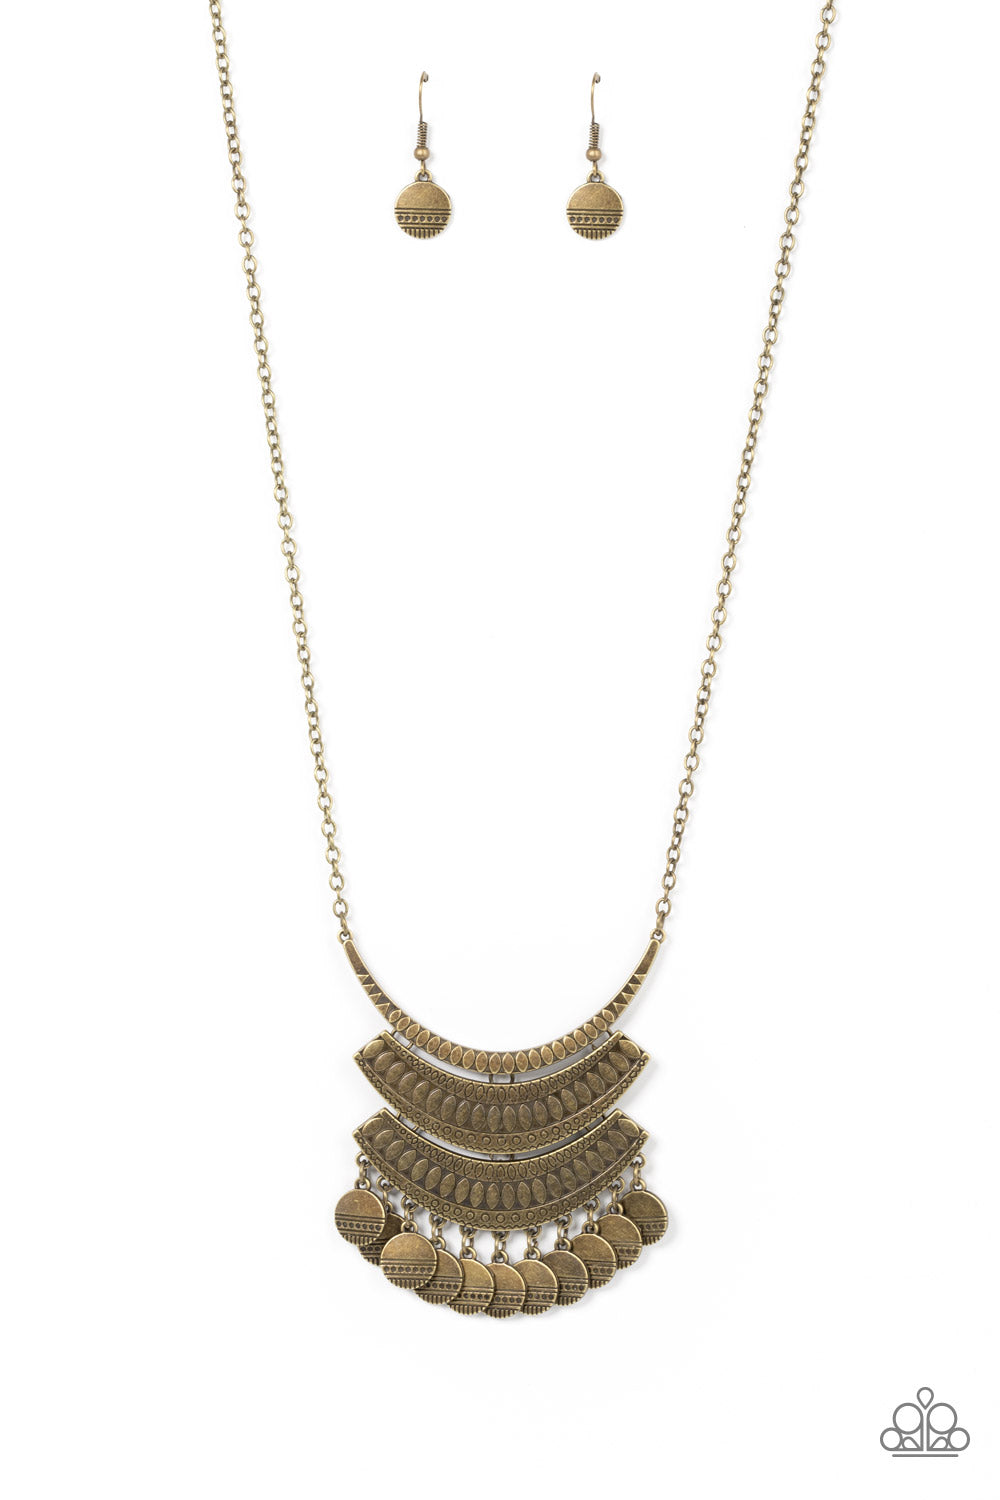 The Empress Statement Necklace